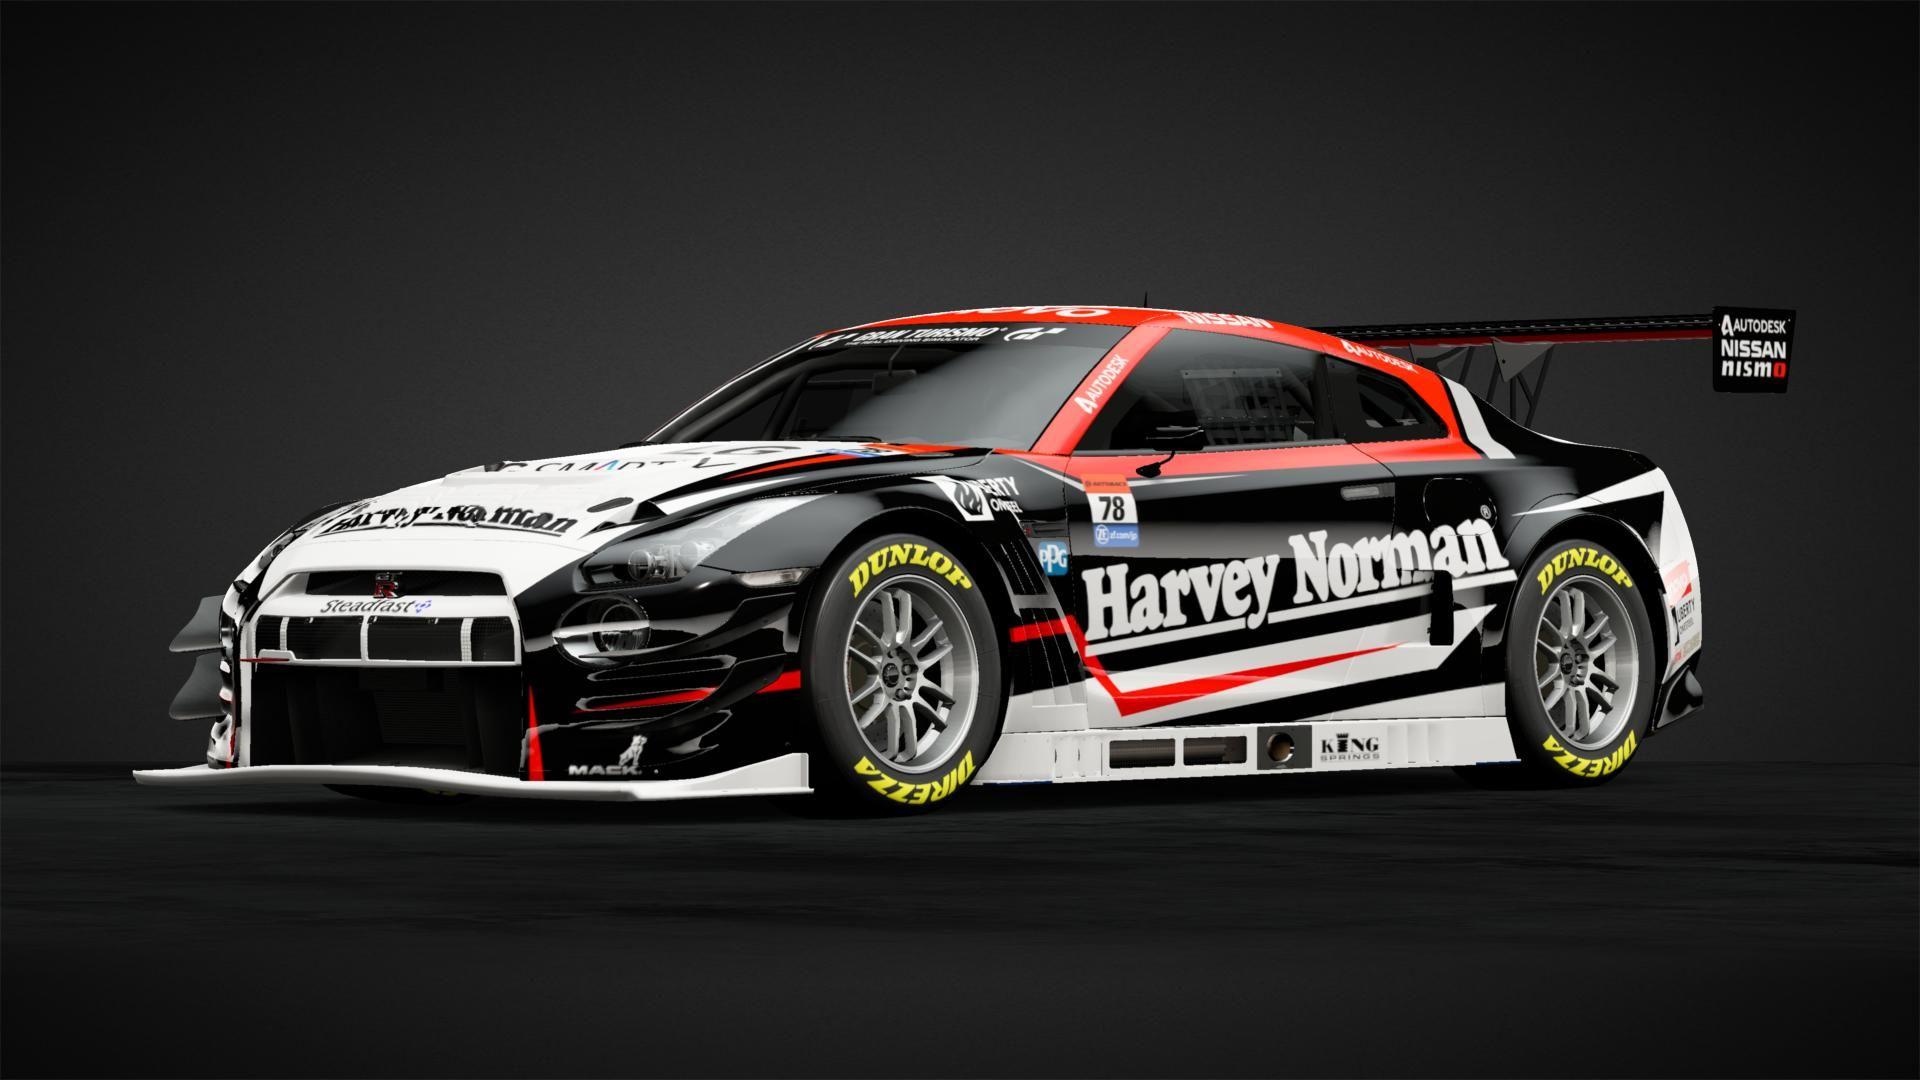 Harvey Norman GT R Nismo GT3 Livery By Prodriver72